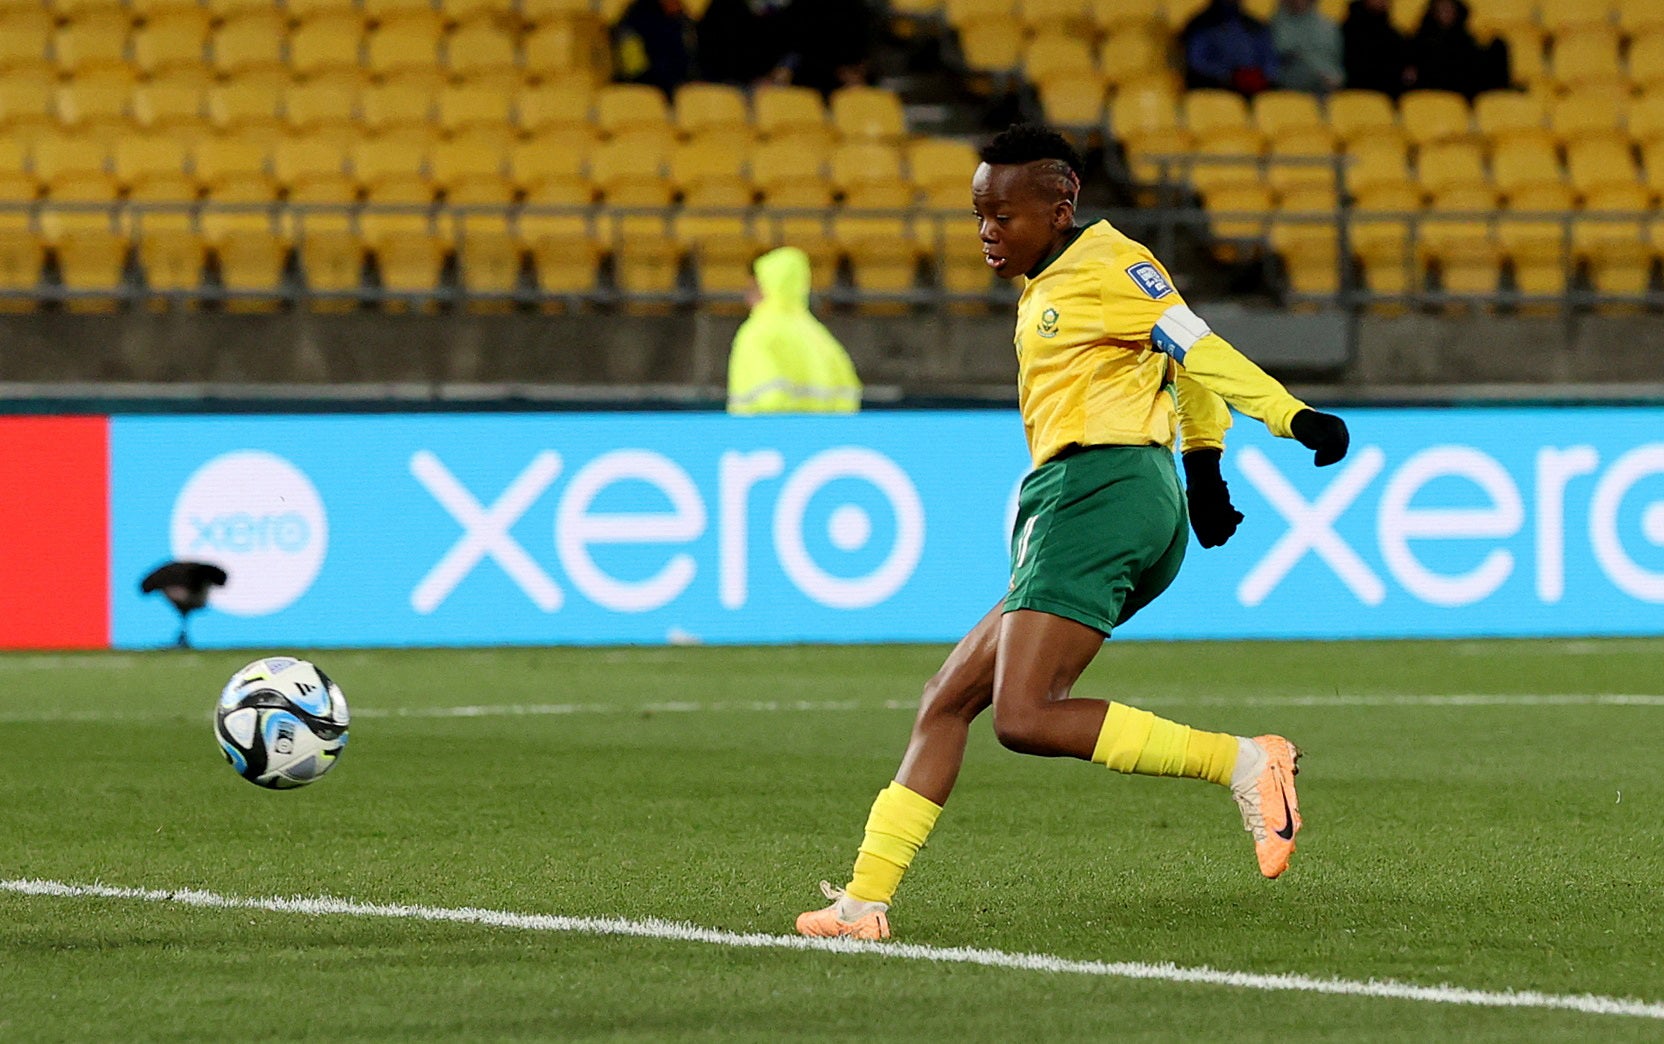 Thembi Kgatlana’s strike puts South Africa in the knockout rounds of the Women’s World Cup for the first time